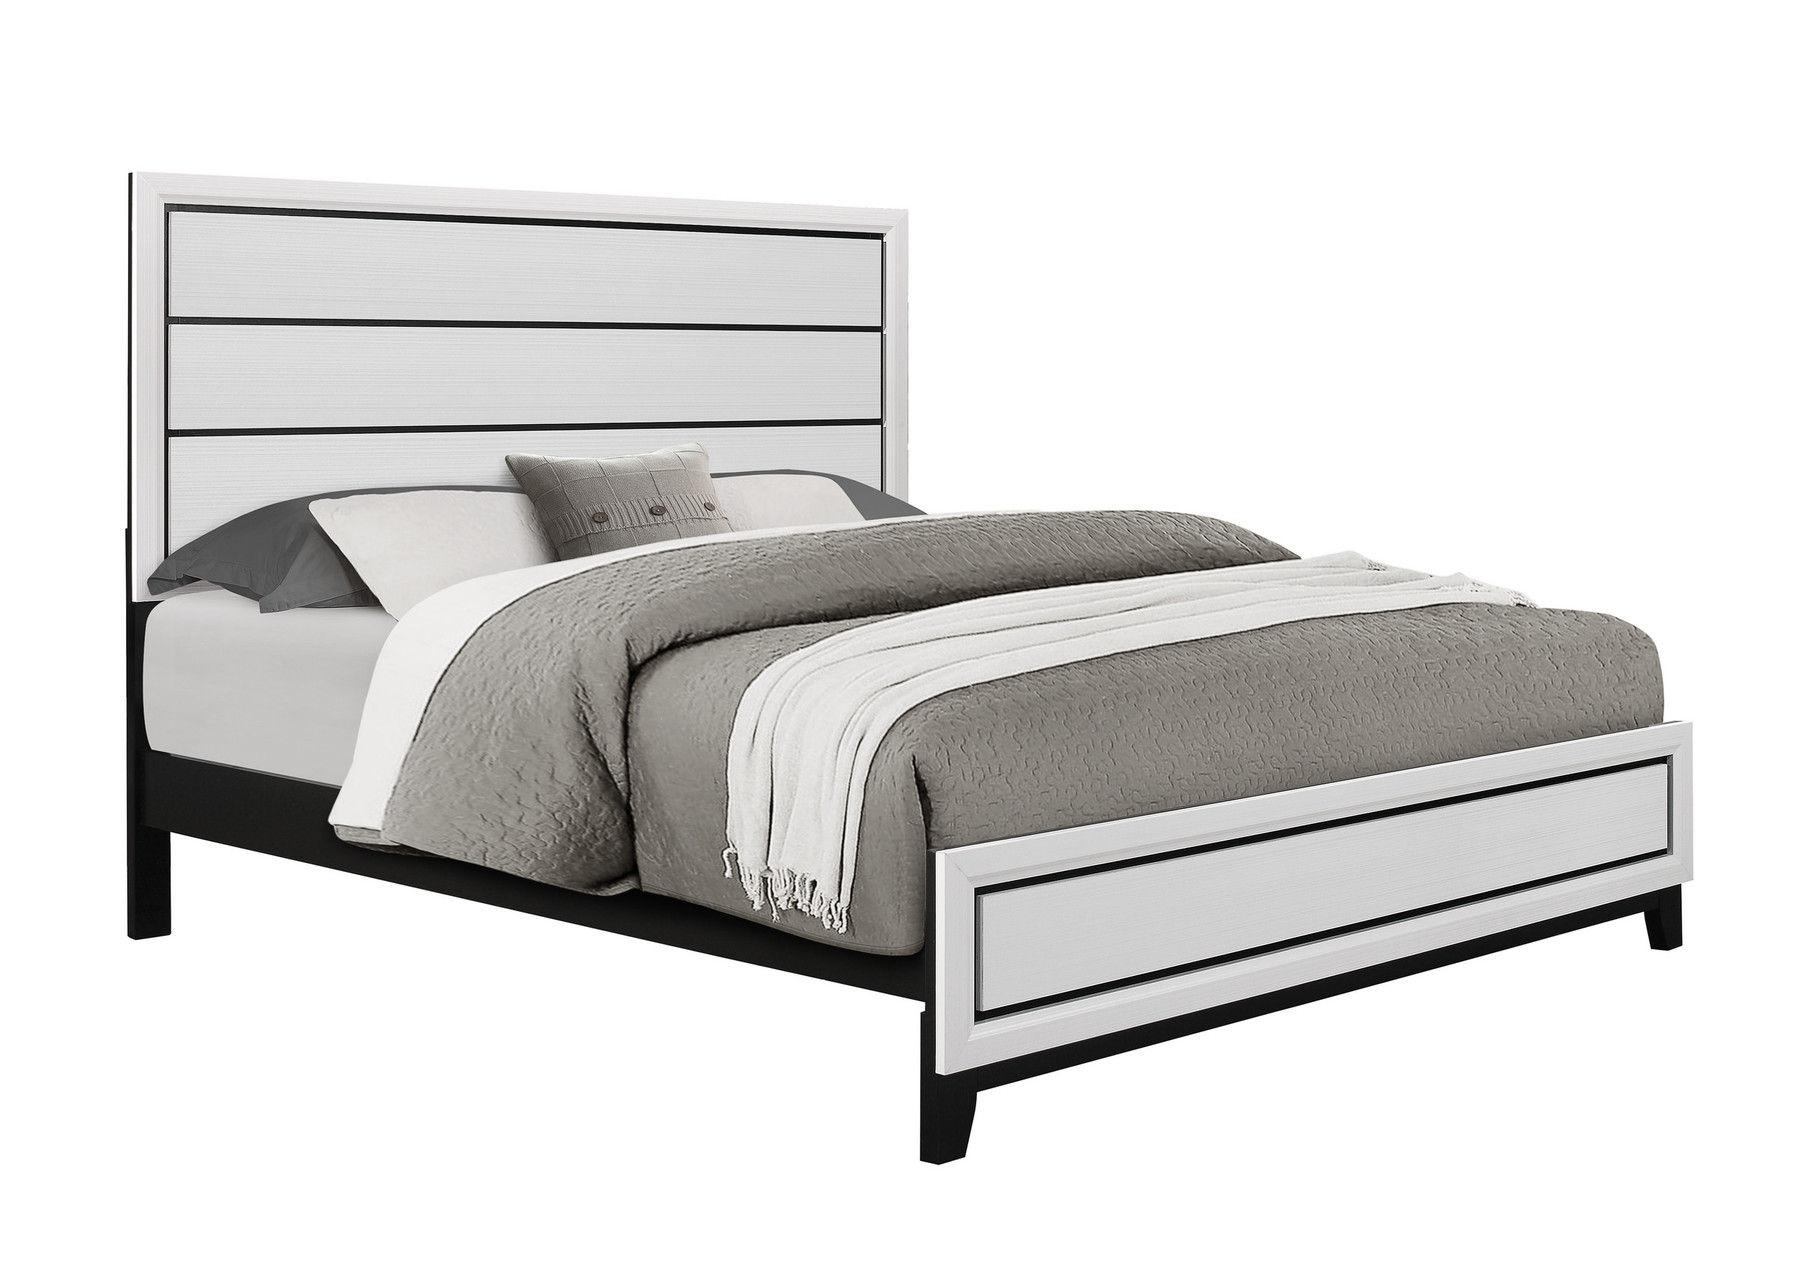 

    
KATE White Finish w/ Dark Accents Casual Queen Size Bed Global US
